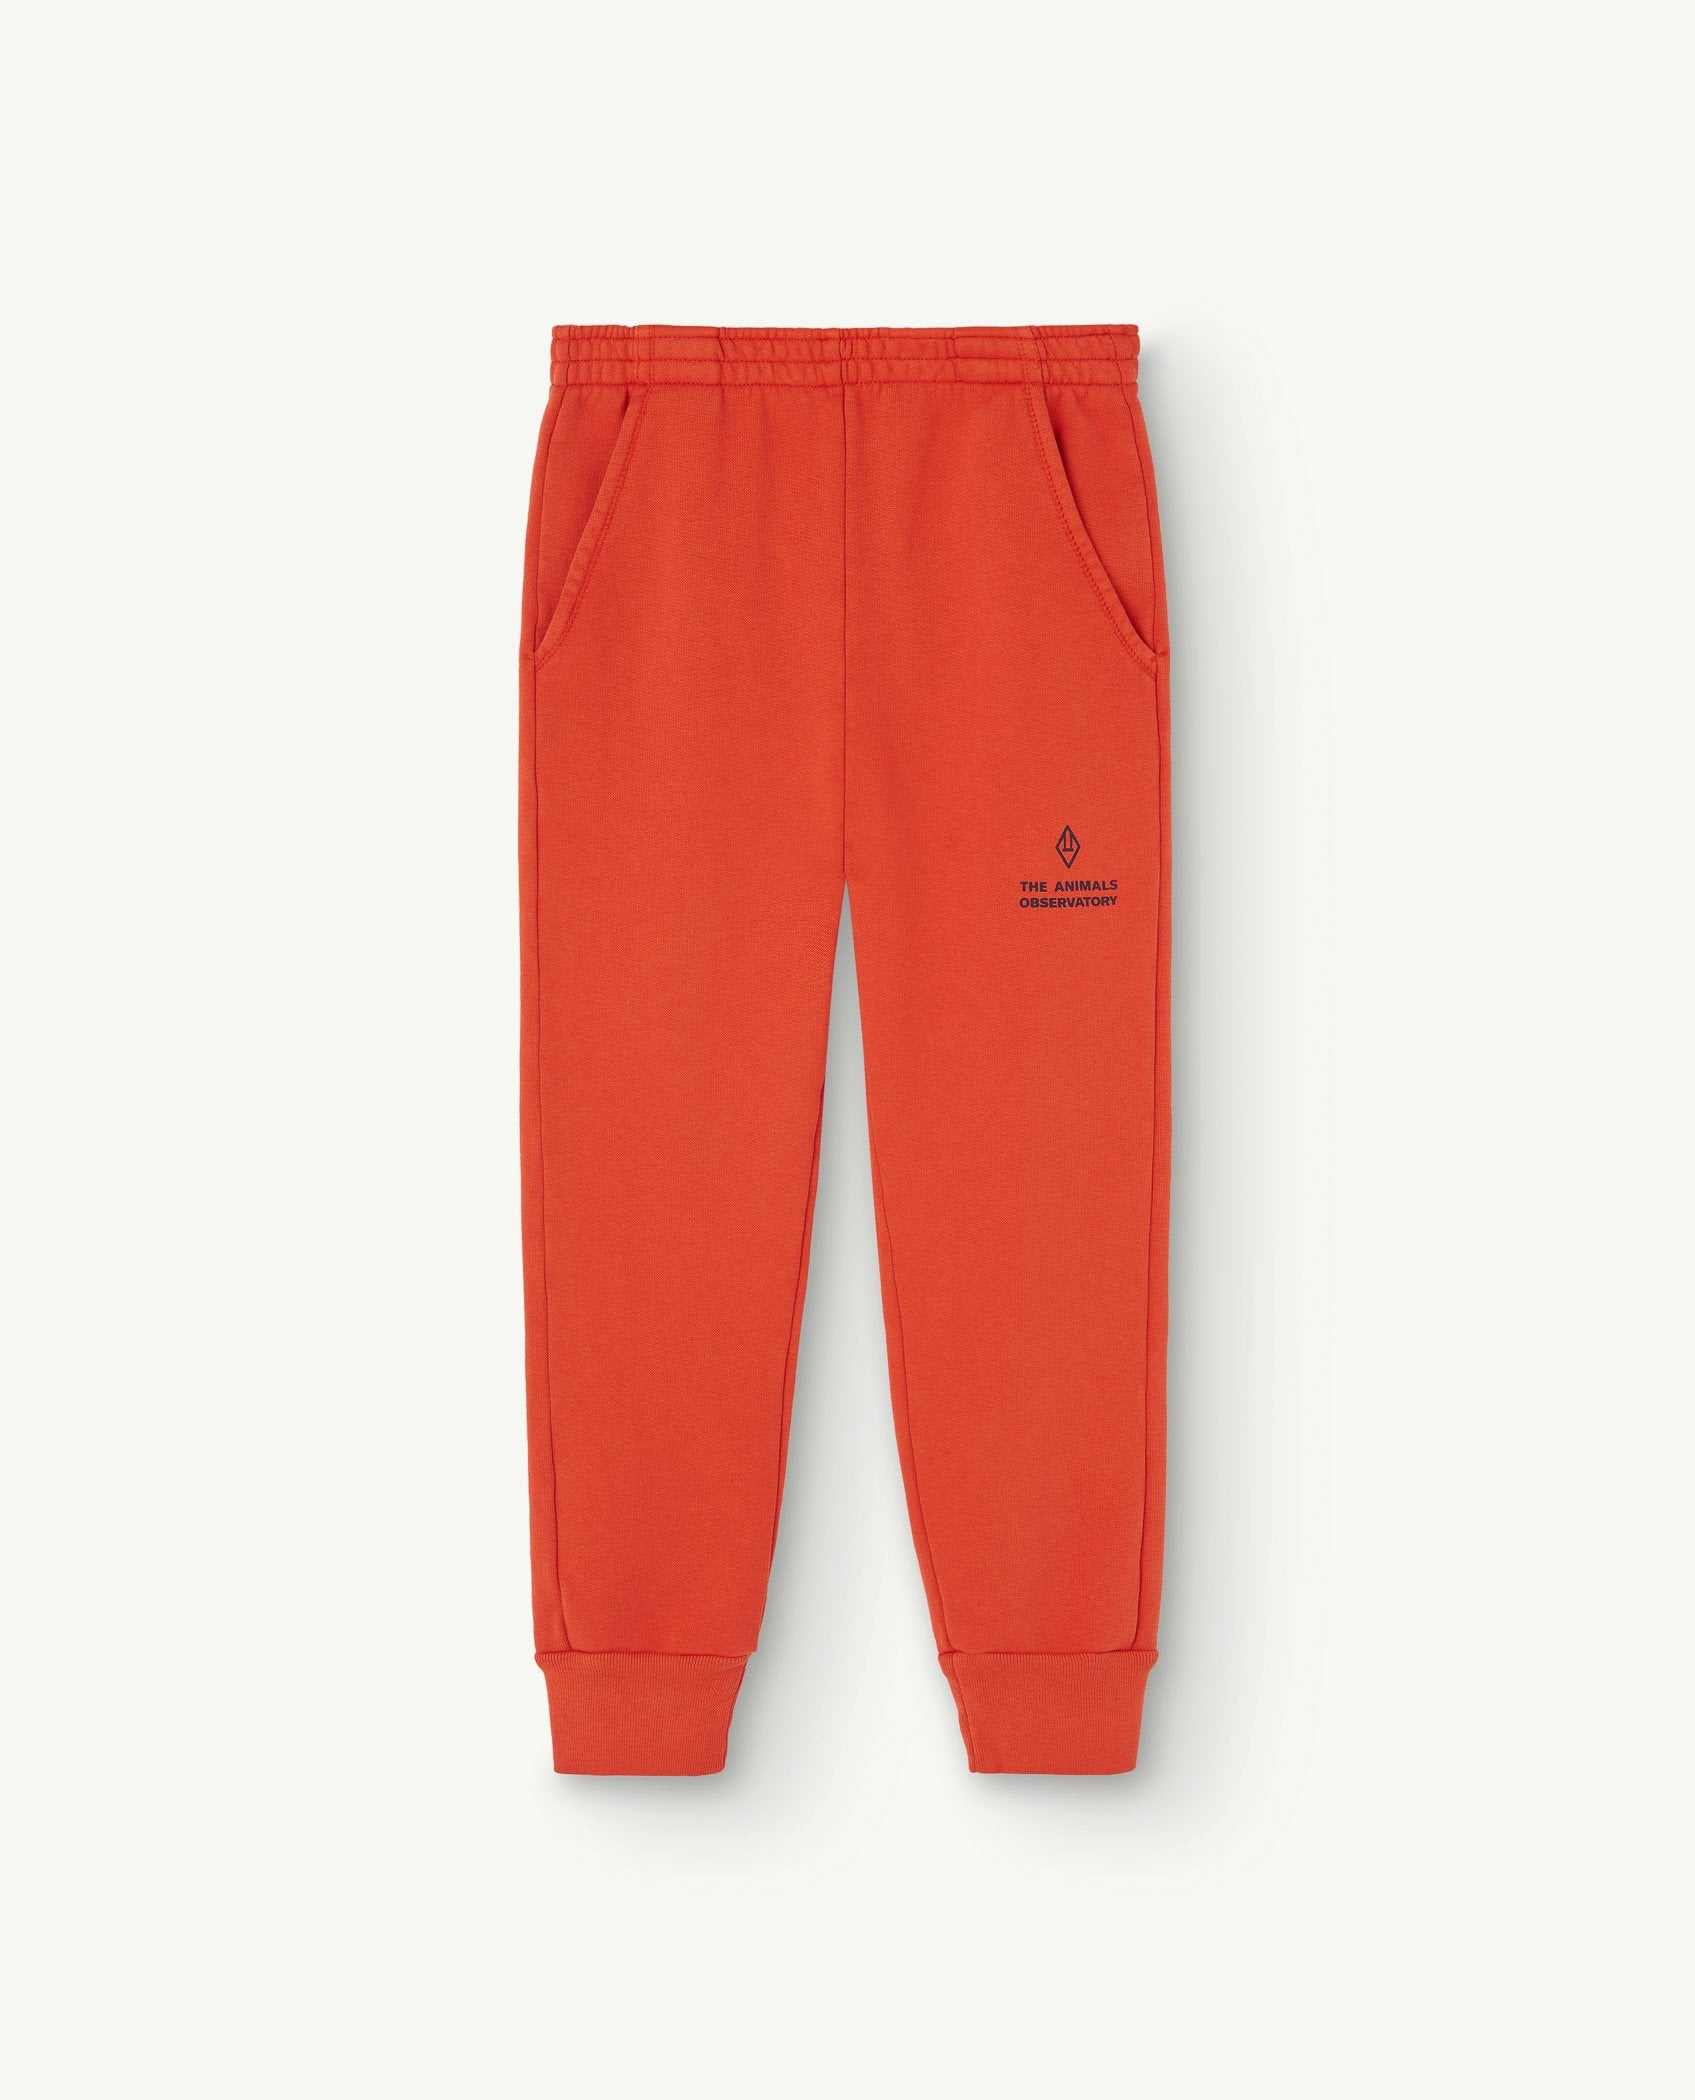 Sweatpants BALLOON red with print on the leg - Coccodrillo online shop